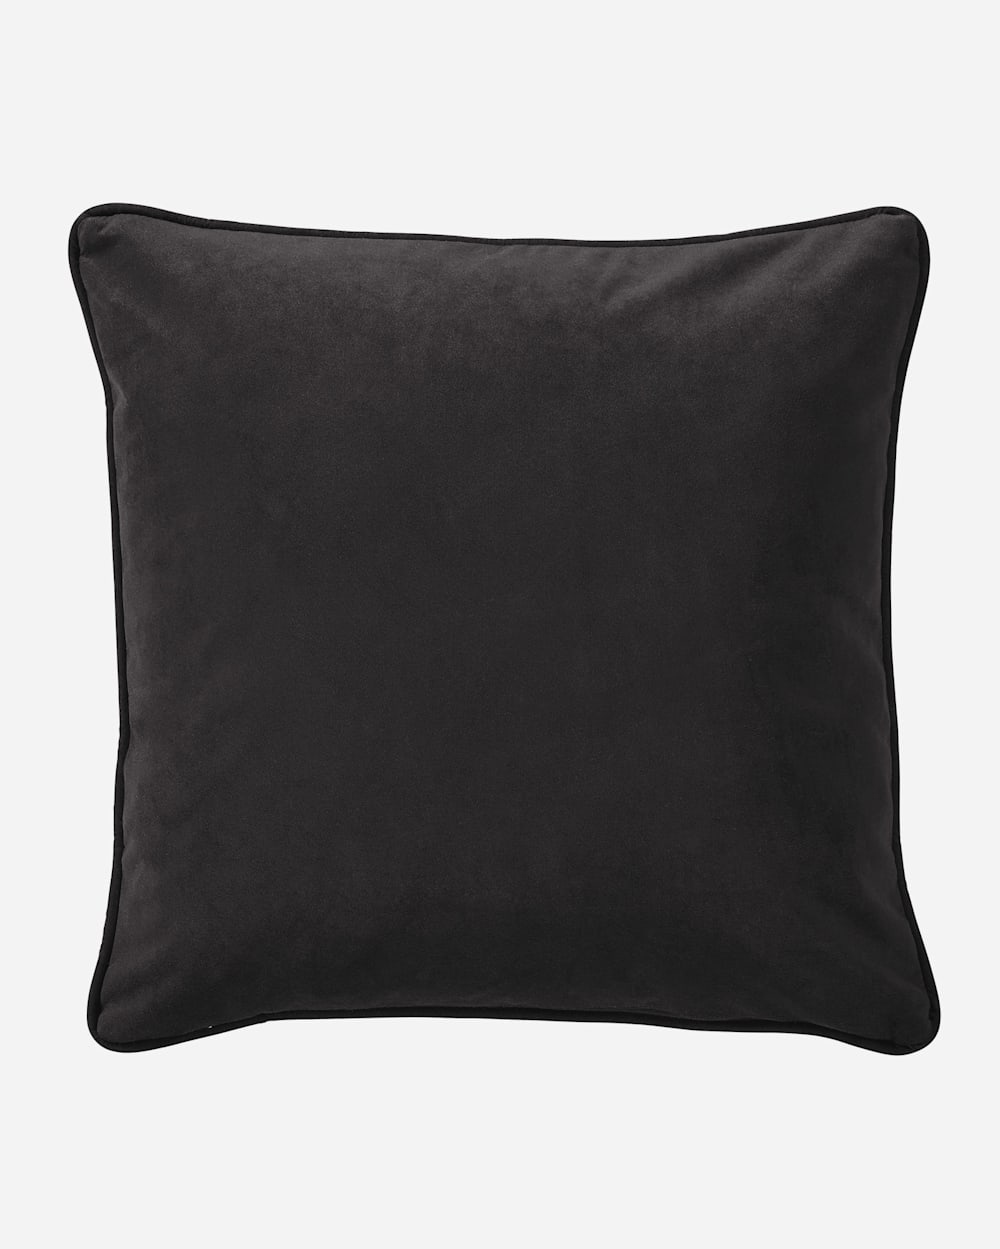 ADDITIONAL VIEW OF KIVA STEPS PILLOW IN BLACK/WHITE image number 2